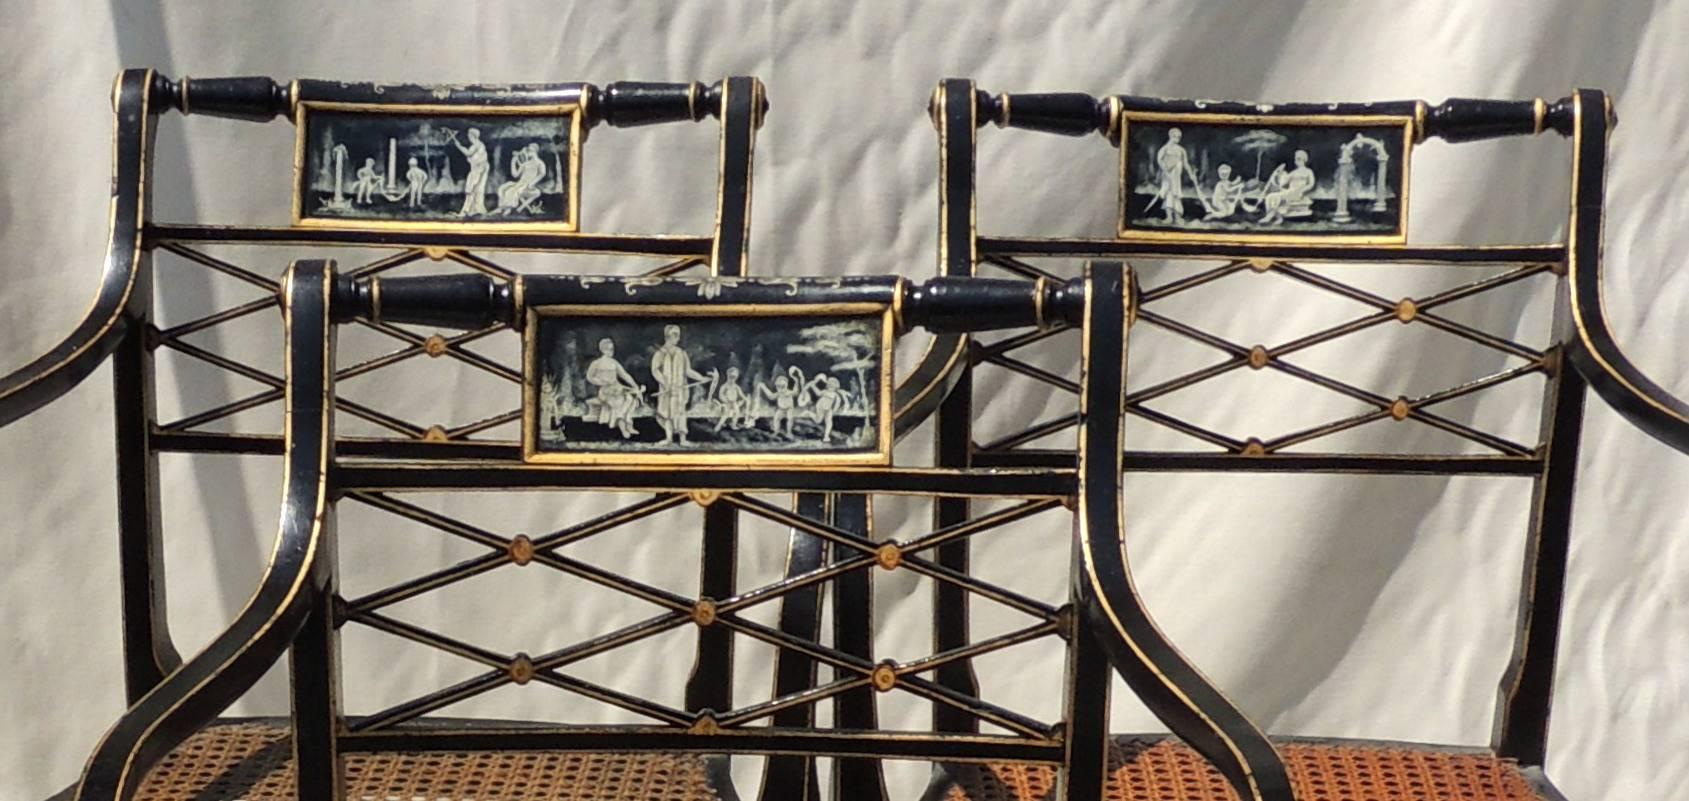 Wonderful set of 14 hand-painted black lacquered gilt caned seat vintage lattice back armchairs. Each chair is painted with a different scene, some of the chairs have been re-hand caned more recently.
They come with matching seat cushions in need